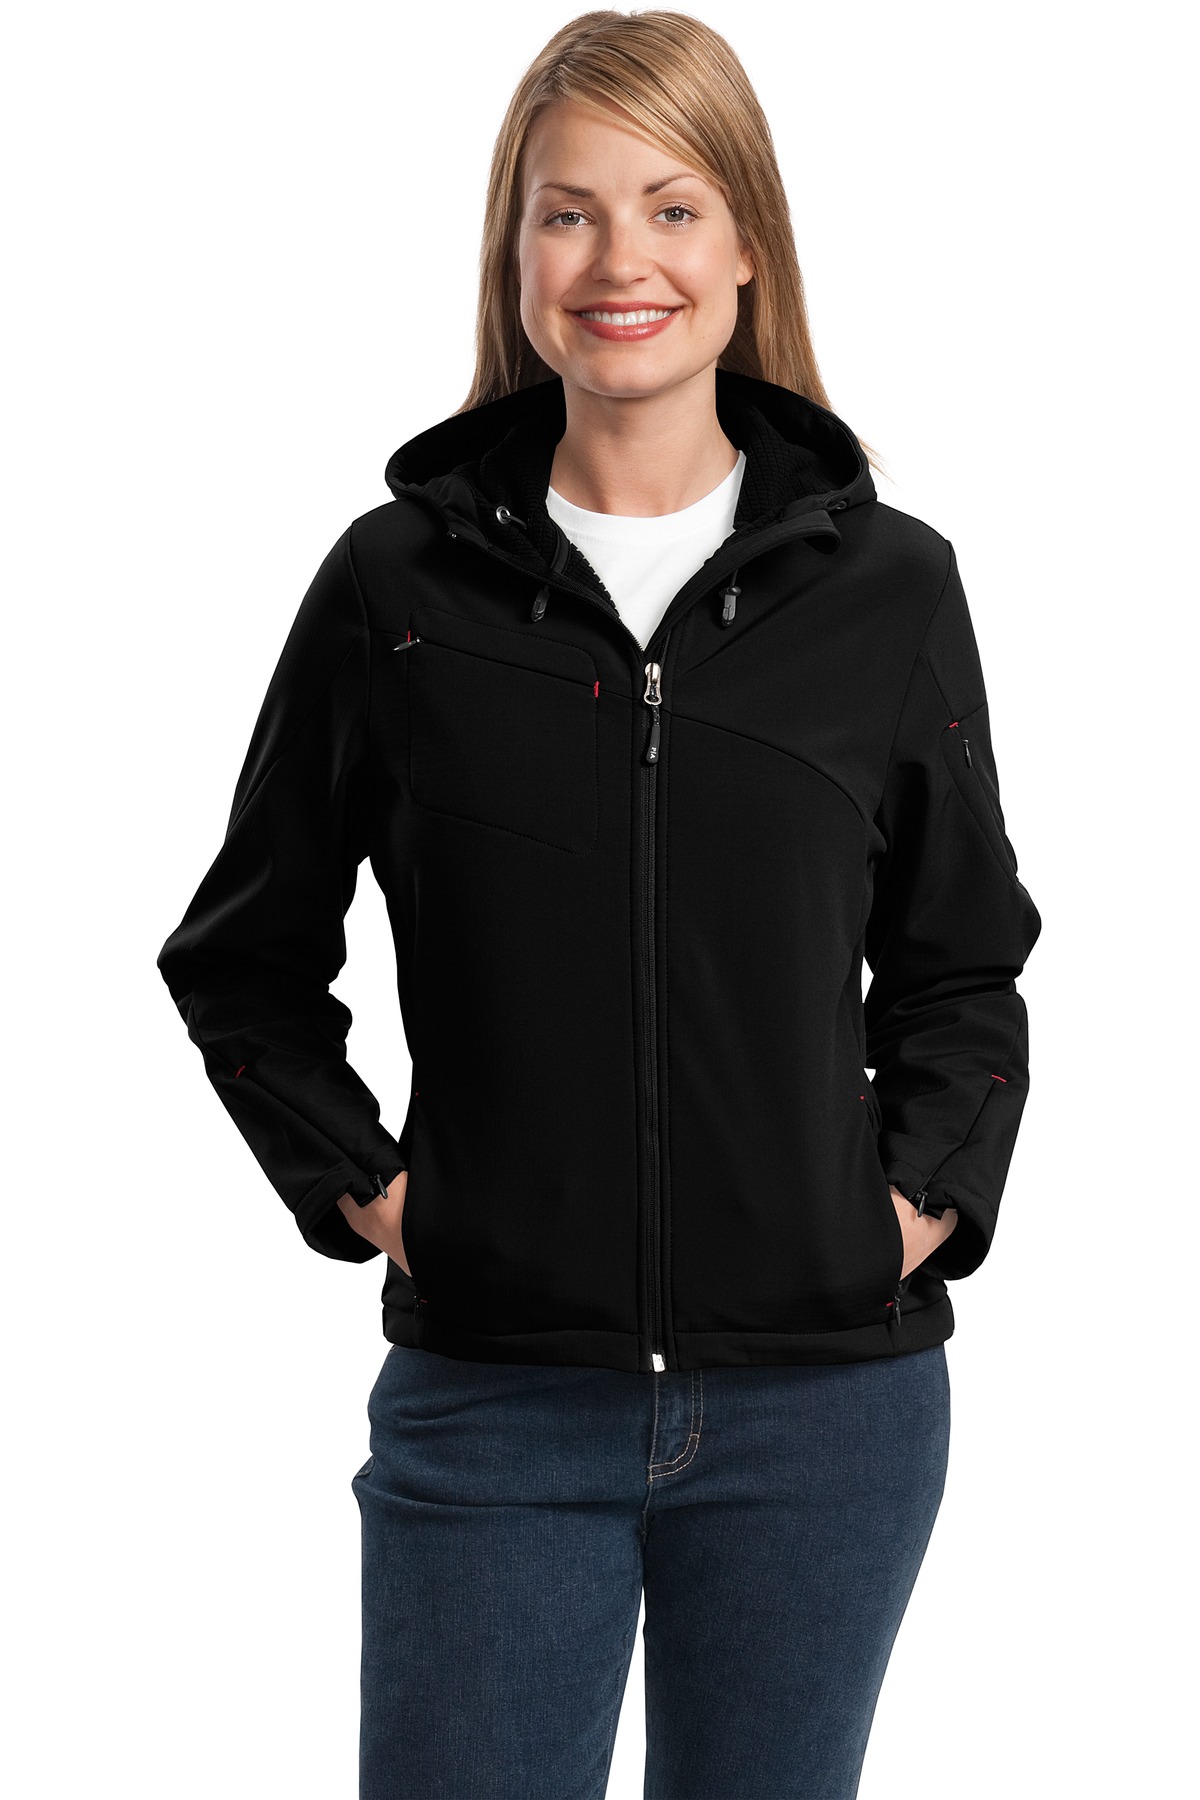 Port Authority L706 Ladies Textured Hooded Soft Shell Jacket - image 2 of 2